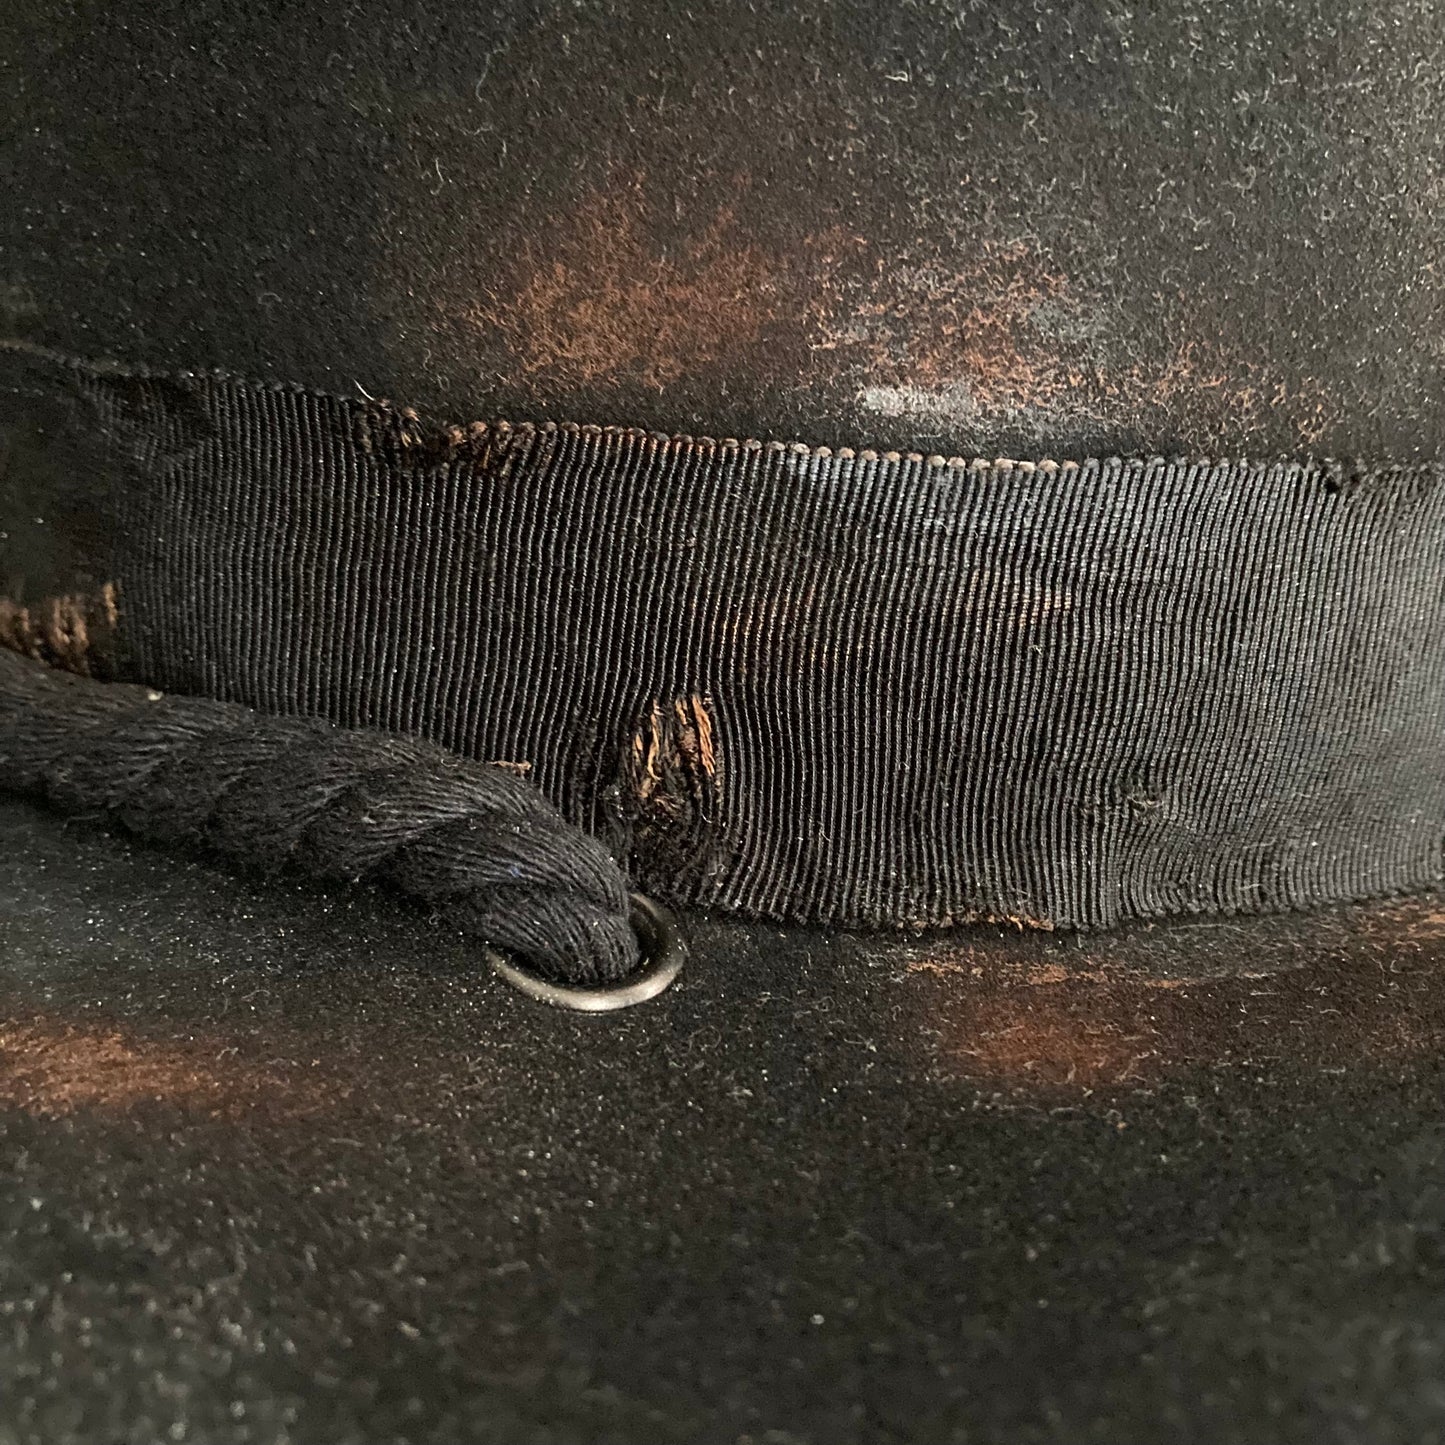 Scorched black flat hat (with rope)